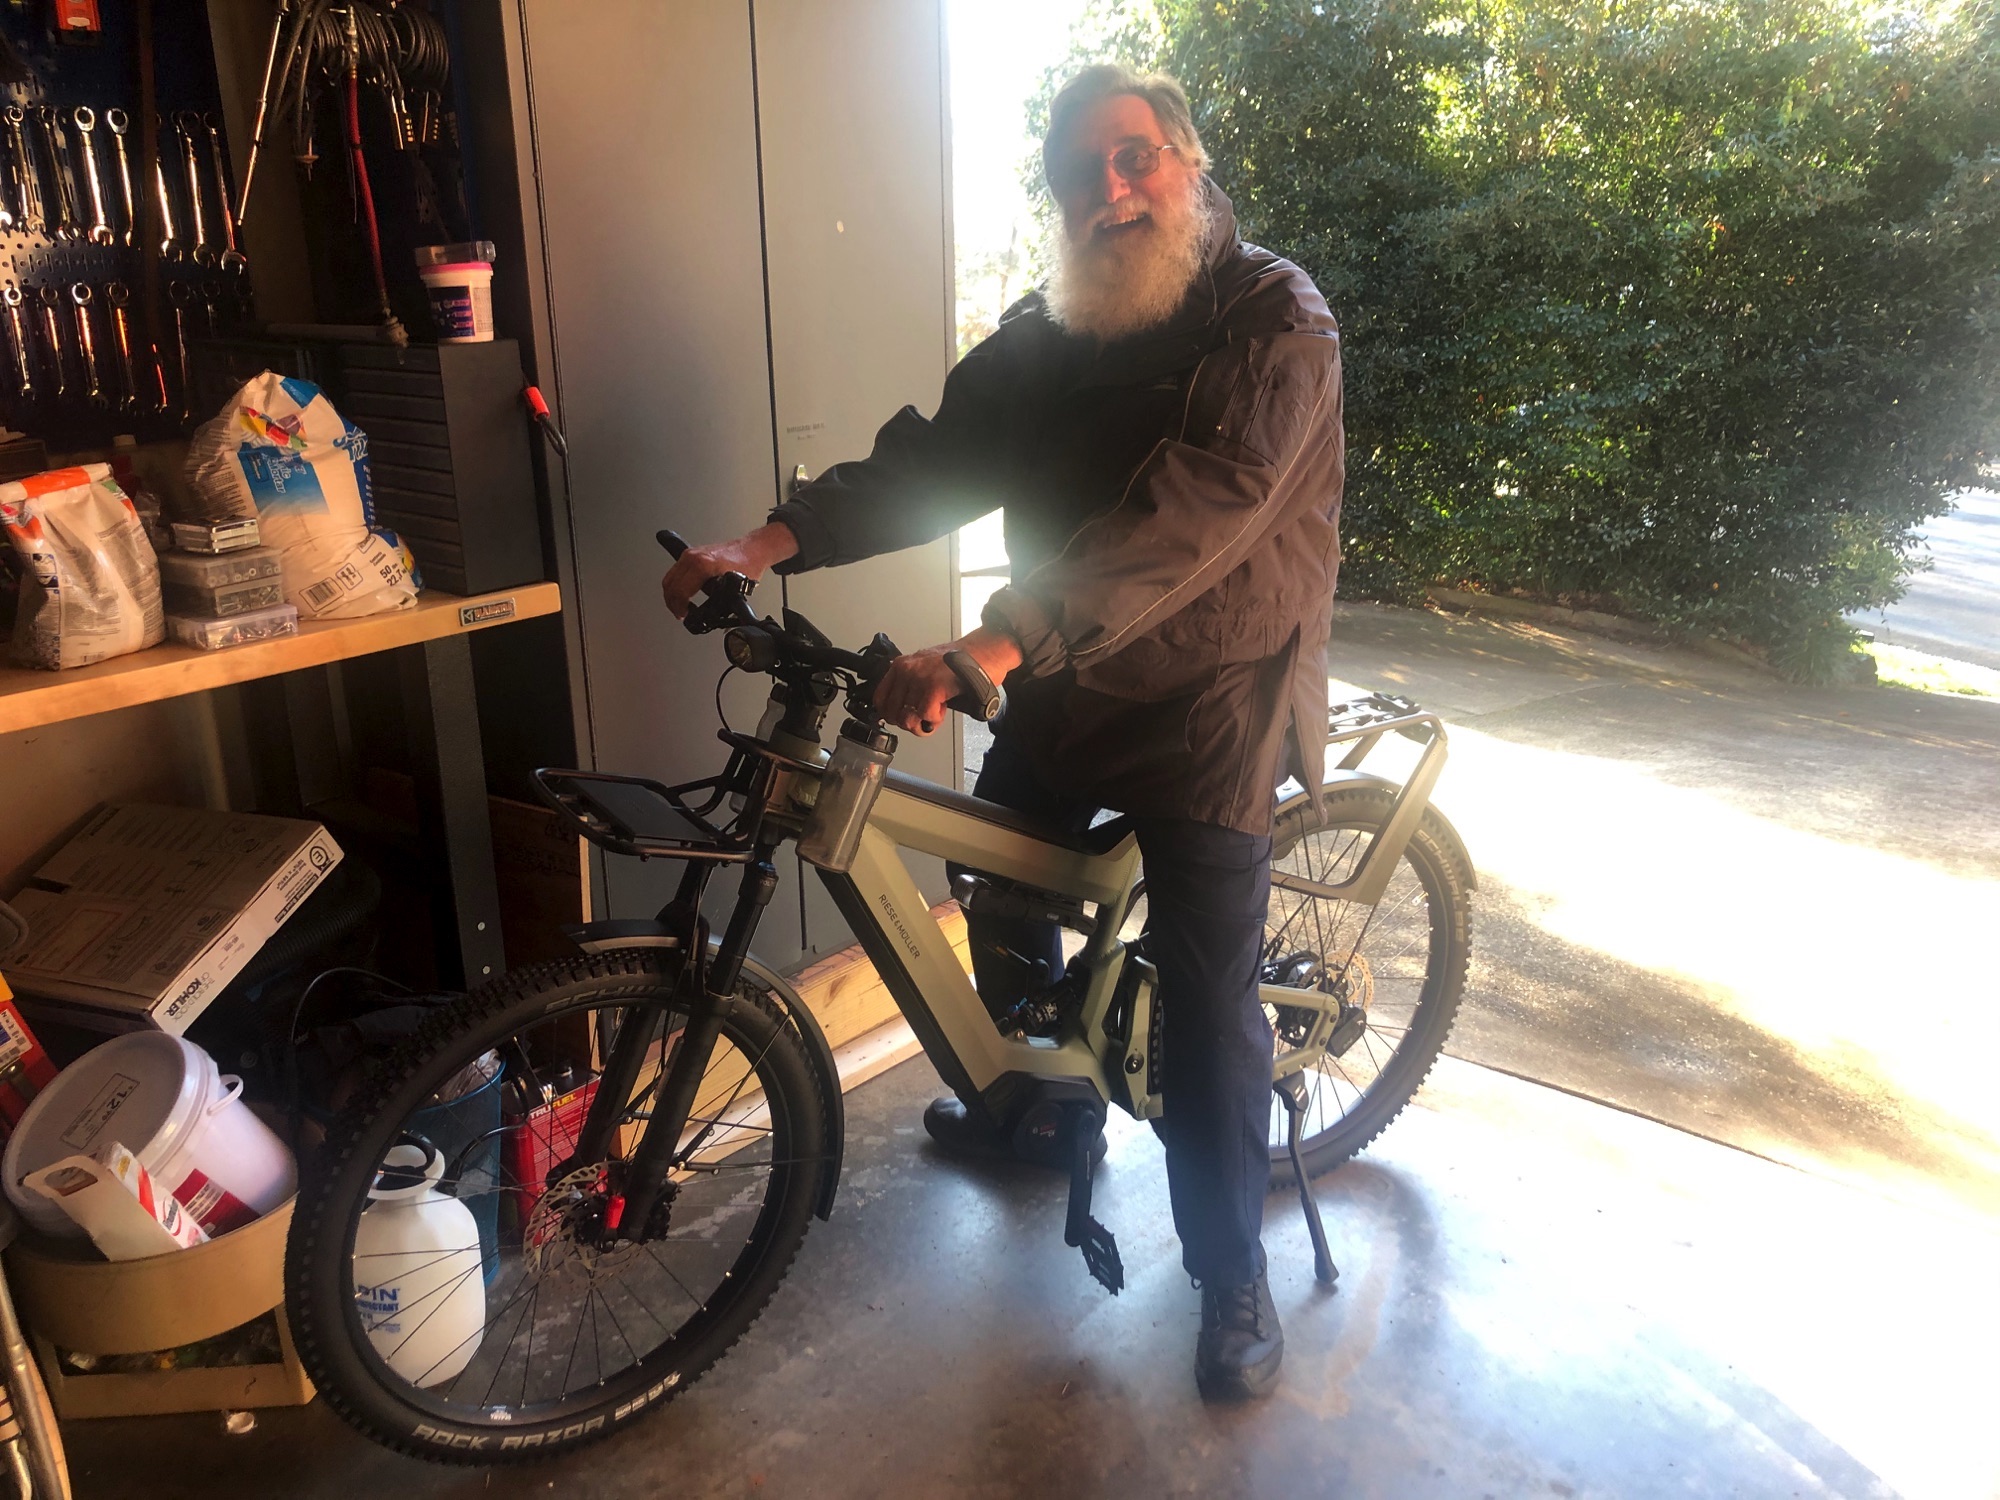 eBike Central delivers in Charlotte NC